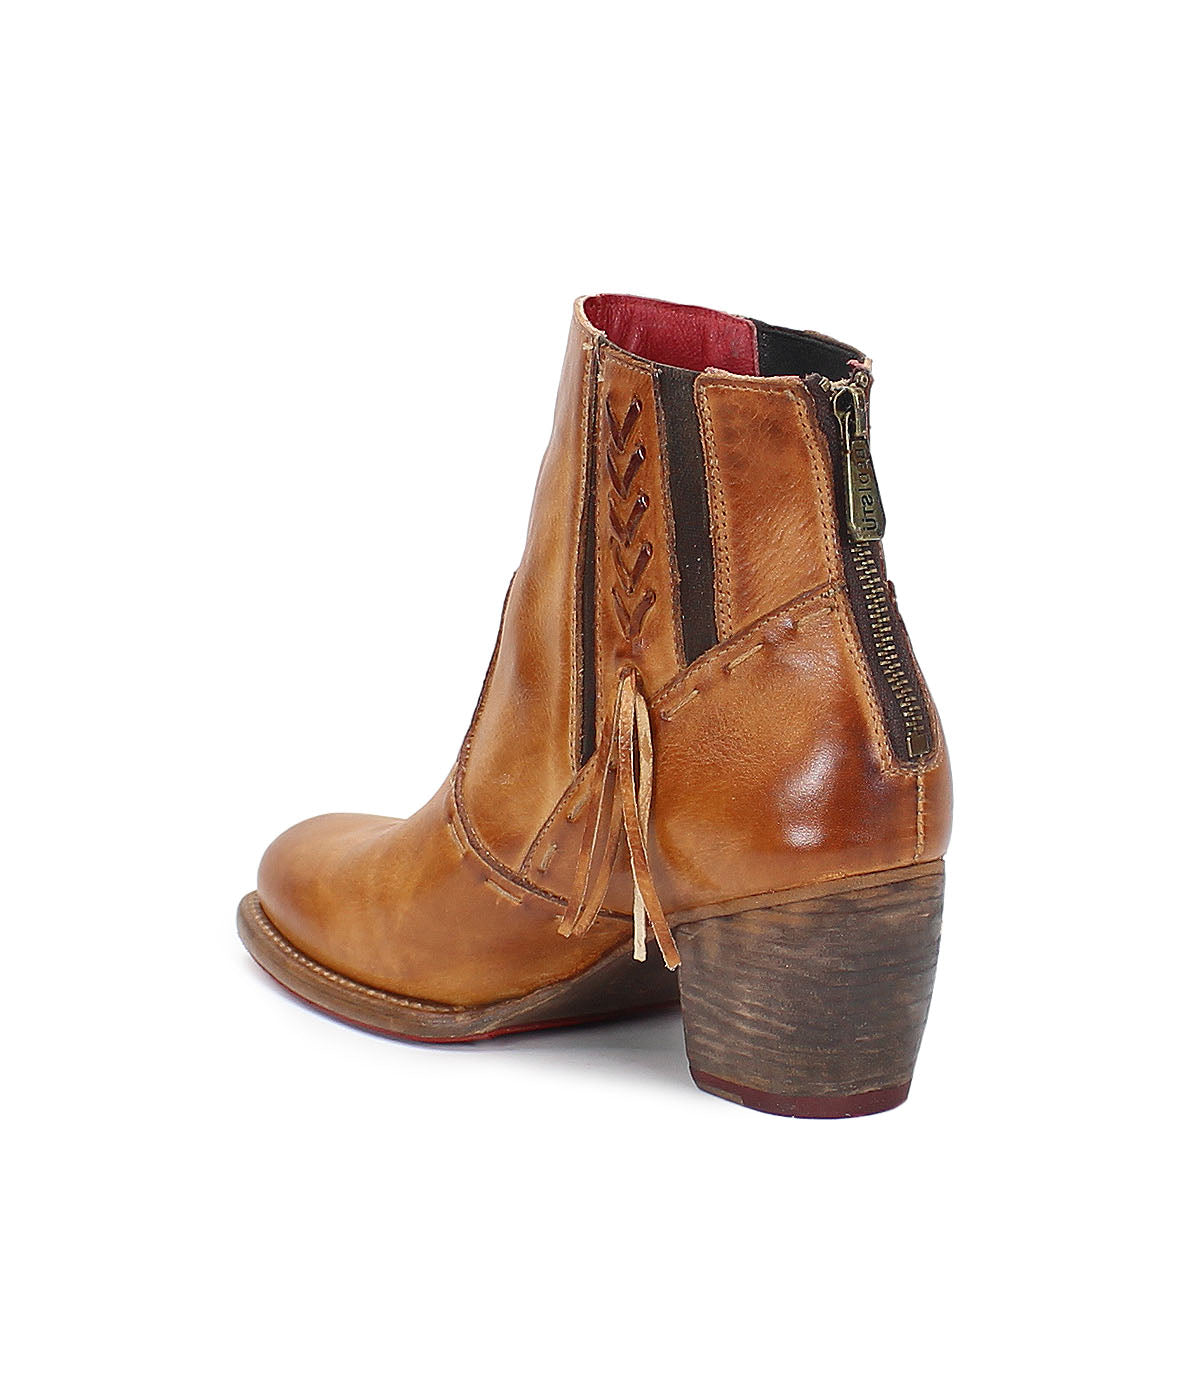 A women's Celestine ankle boot by Bed Stu in tan leather.